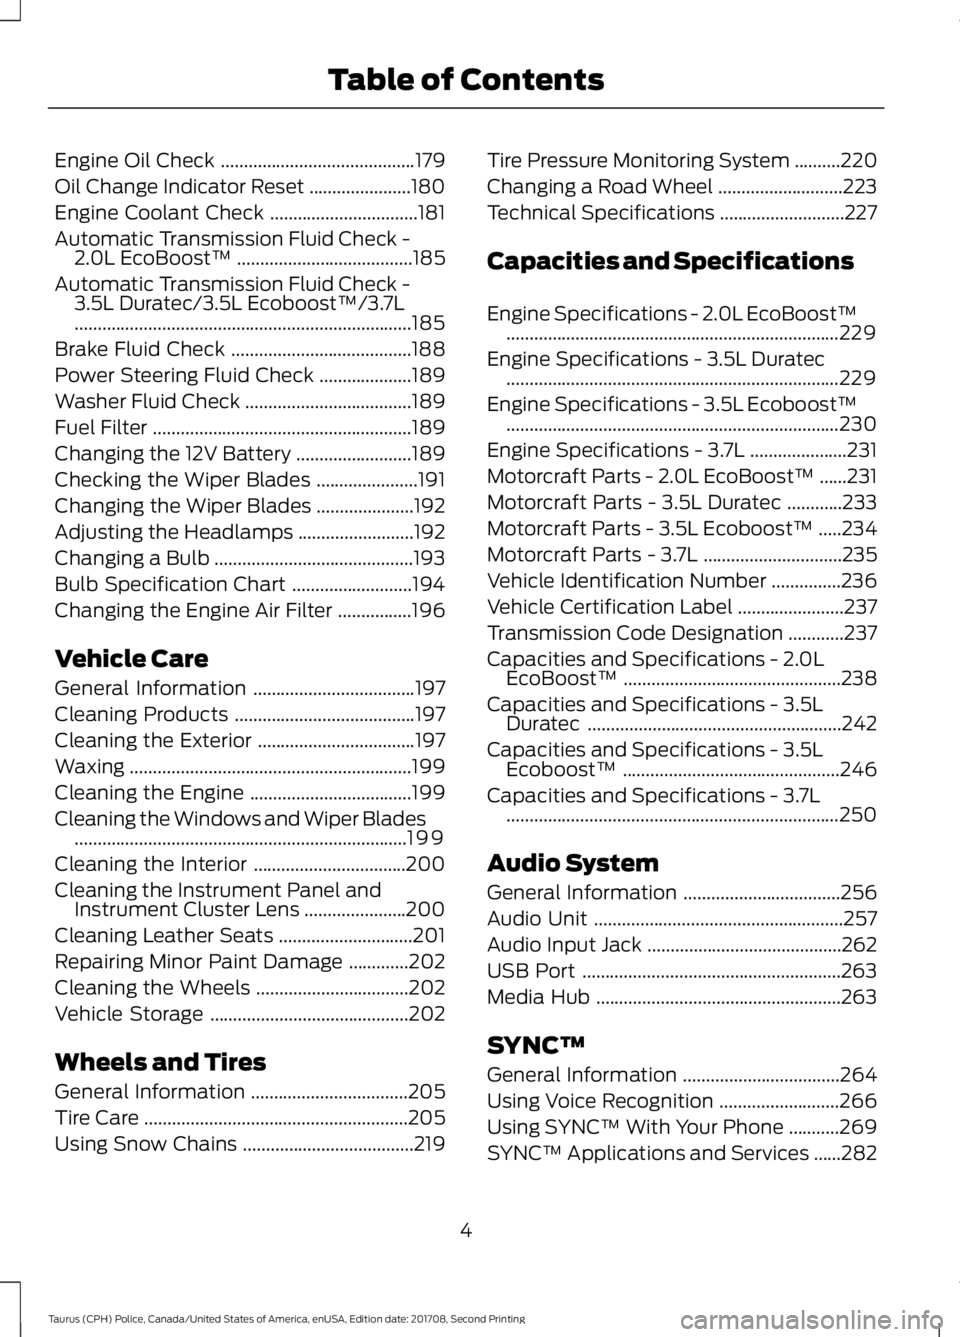 FORD POLICE INTERCEPTOR 2018  Warranty Guide Engine Oil Check
..........................................179
Oil Change Indicator Reset ......................
180
Engine Coolant Check ................................
181
Automatic Transmission Fl